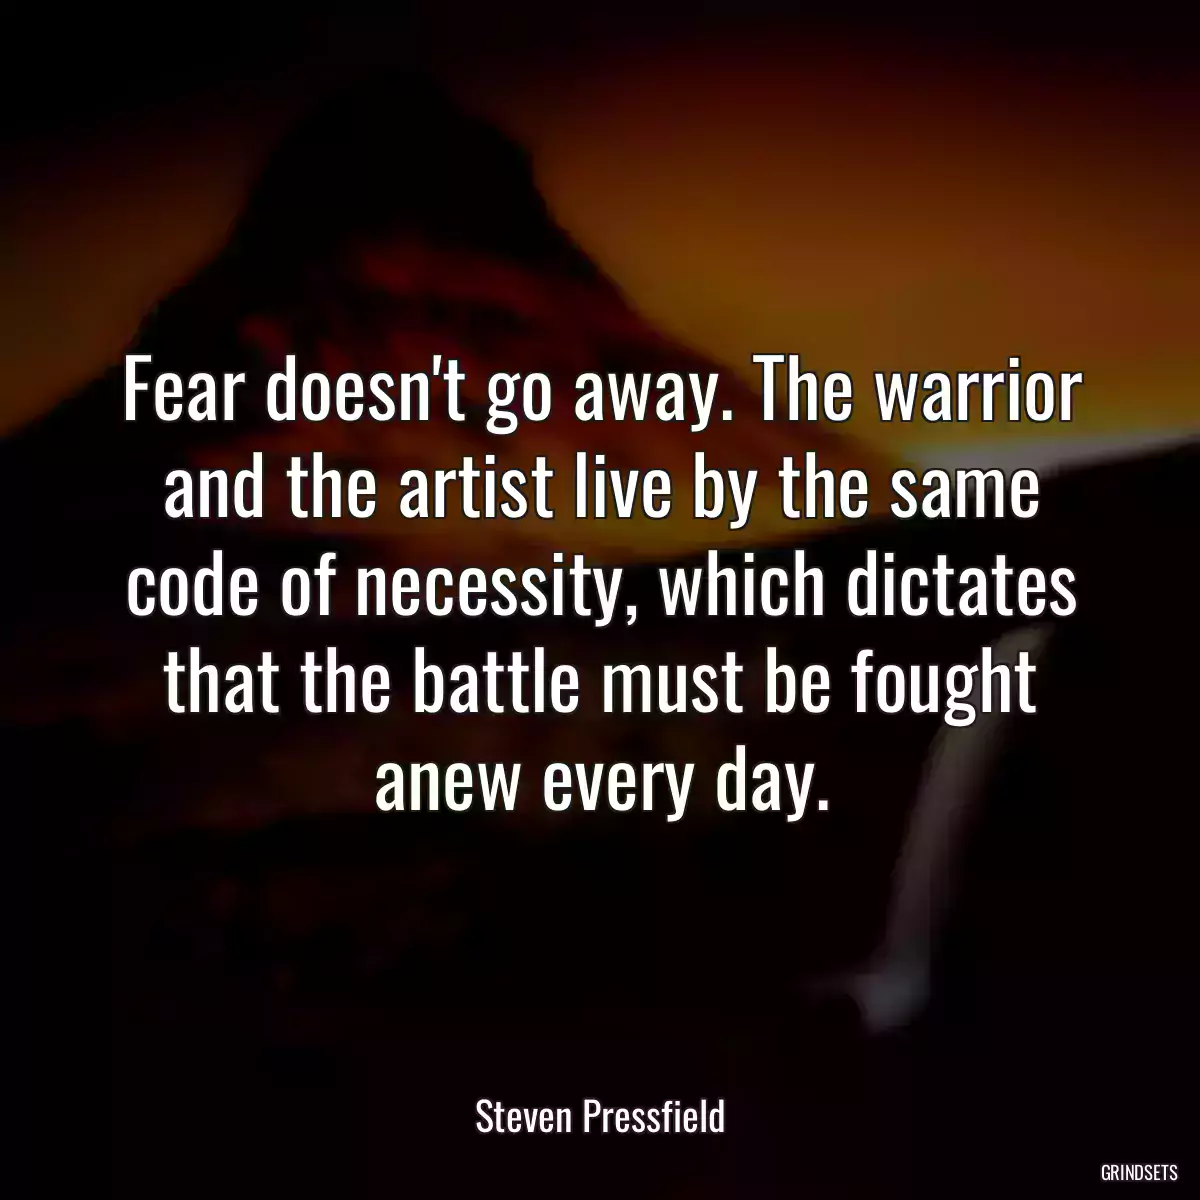 Fear doesn\'t go away. The warrior and the artist live by the same code of necessity, which dictates that the battle must be fought anew every day.